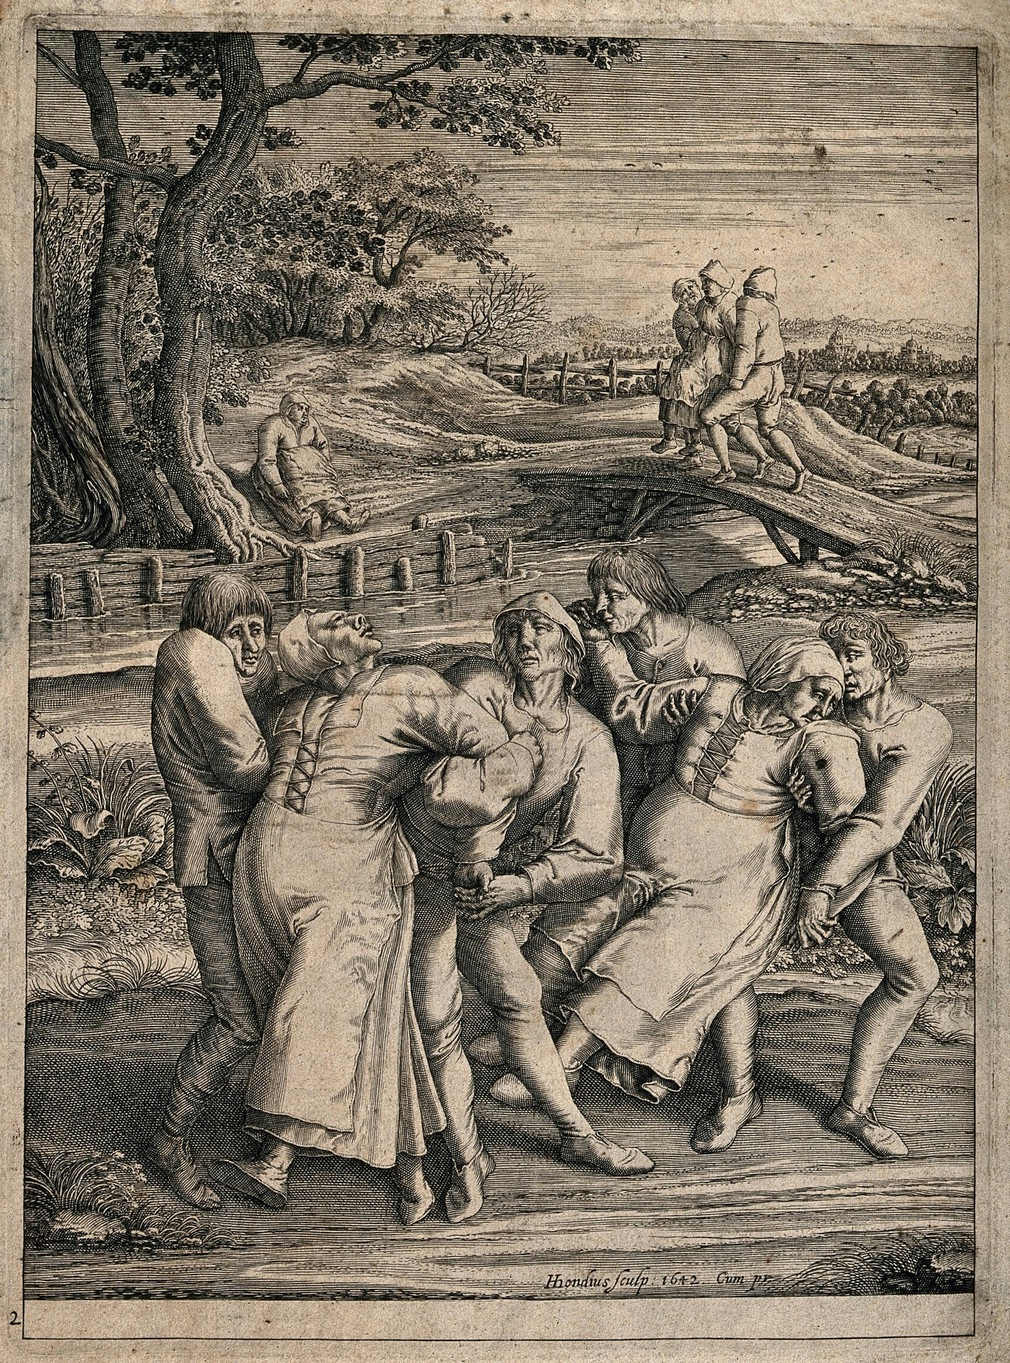 Engraving of women being restrained in a rural area.